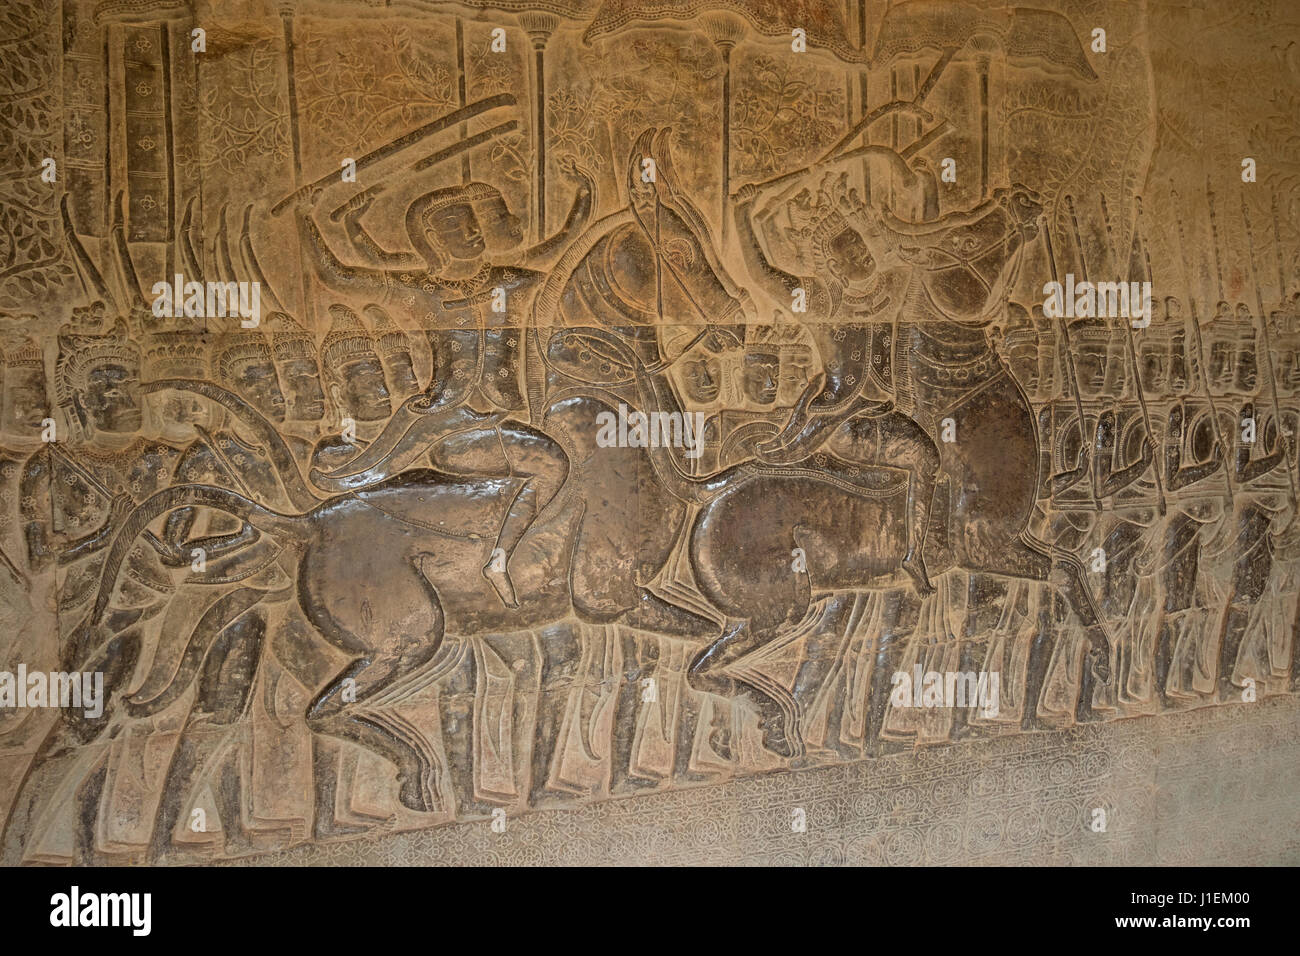 Decorations in bas-reliefs with,Warriors and horses, Temple of Angkor Wat Stock Photo